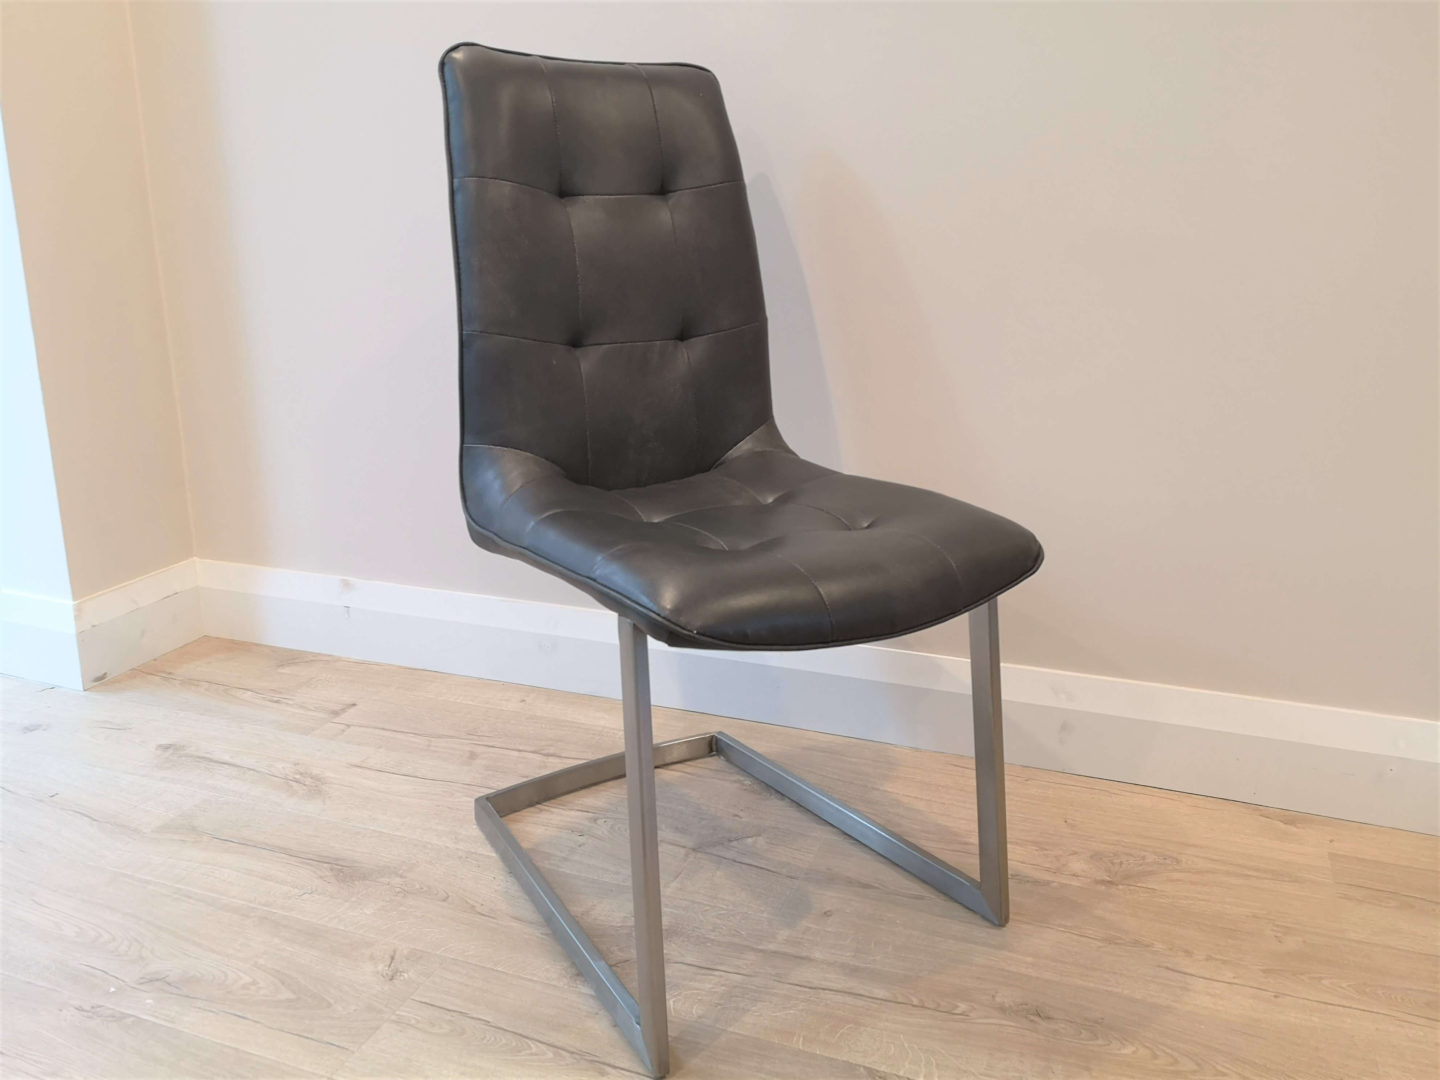 A grey, faux leather dining chair.